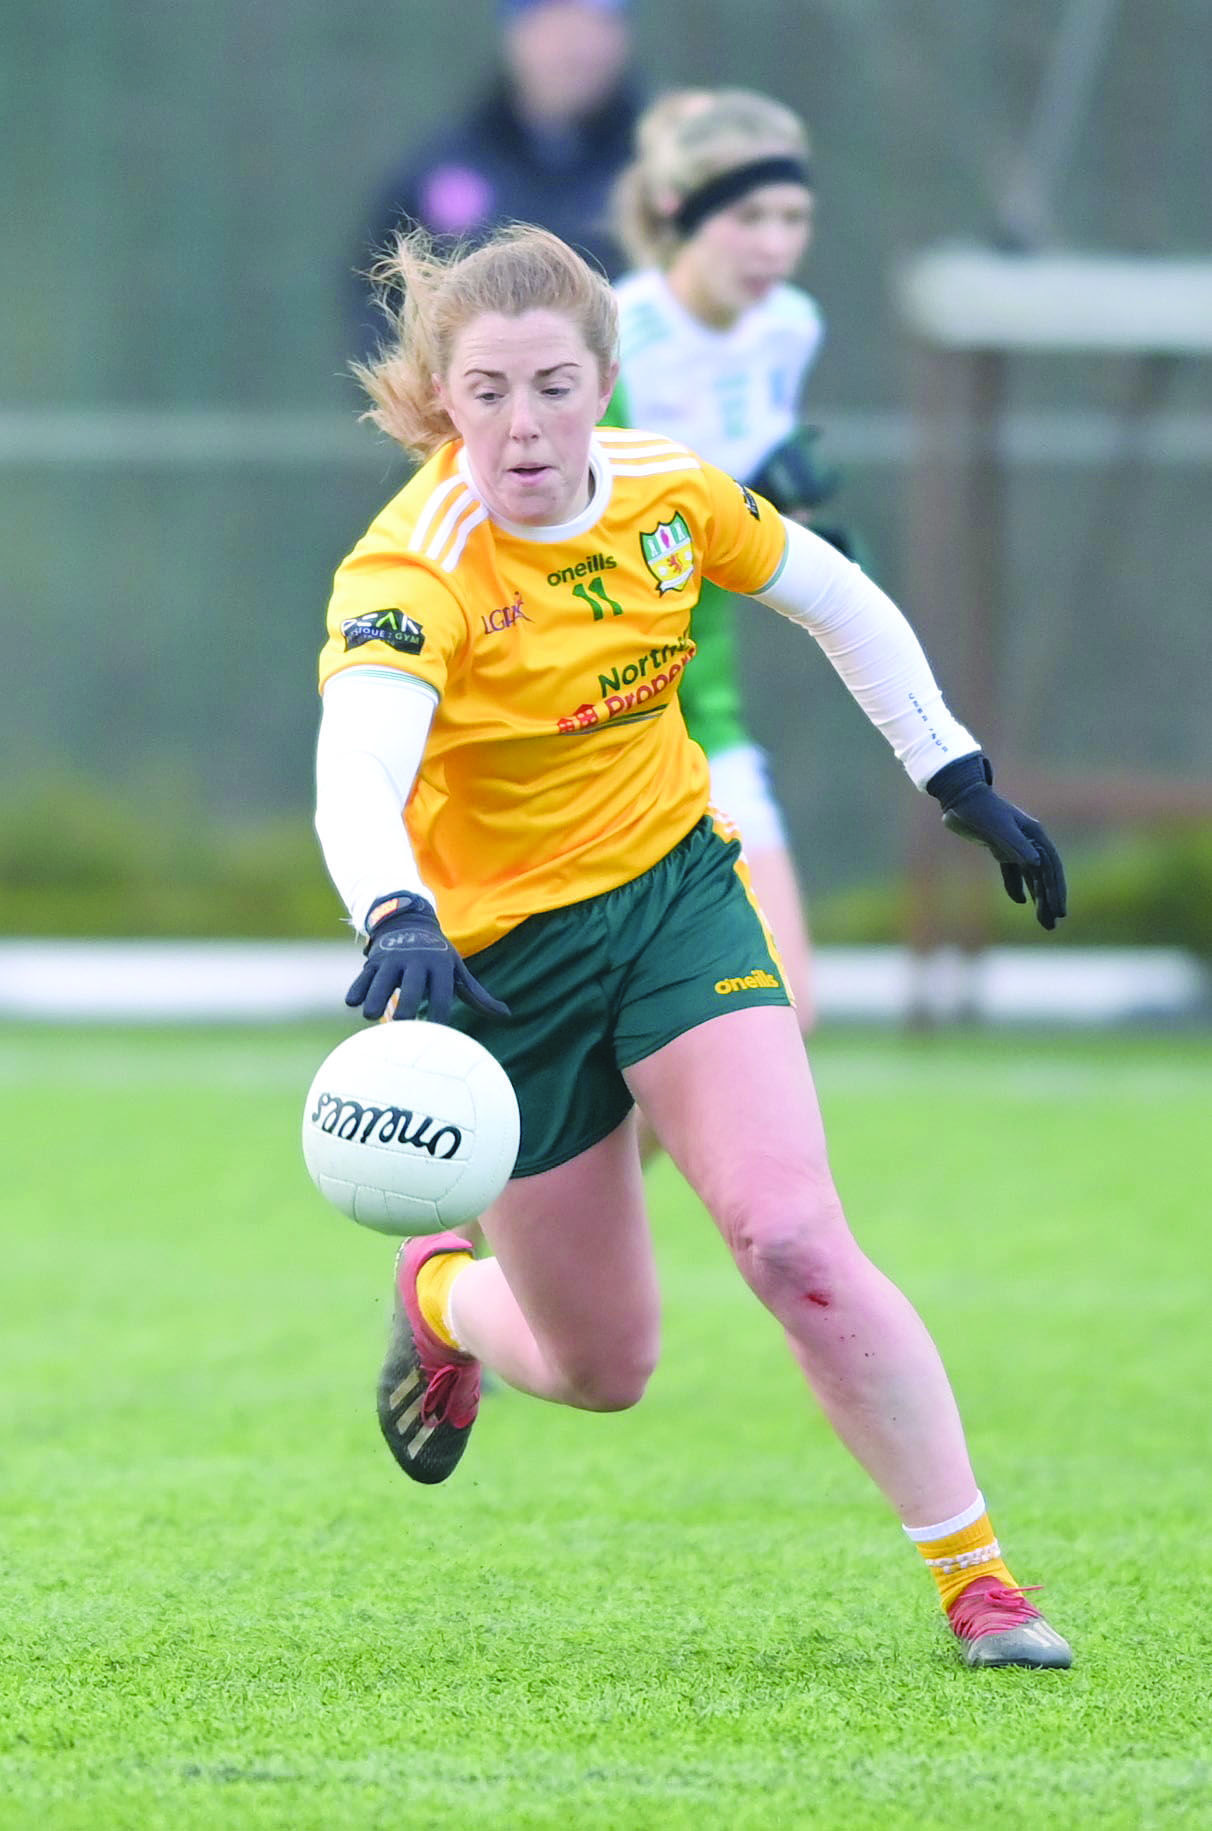 Cathy Carey was in fine form in the win over Limerick last weekend